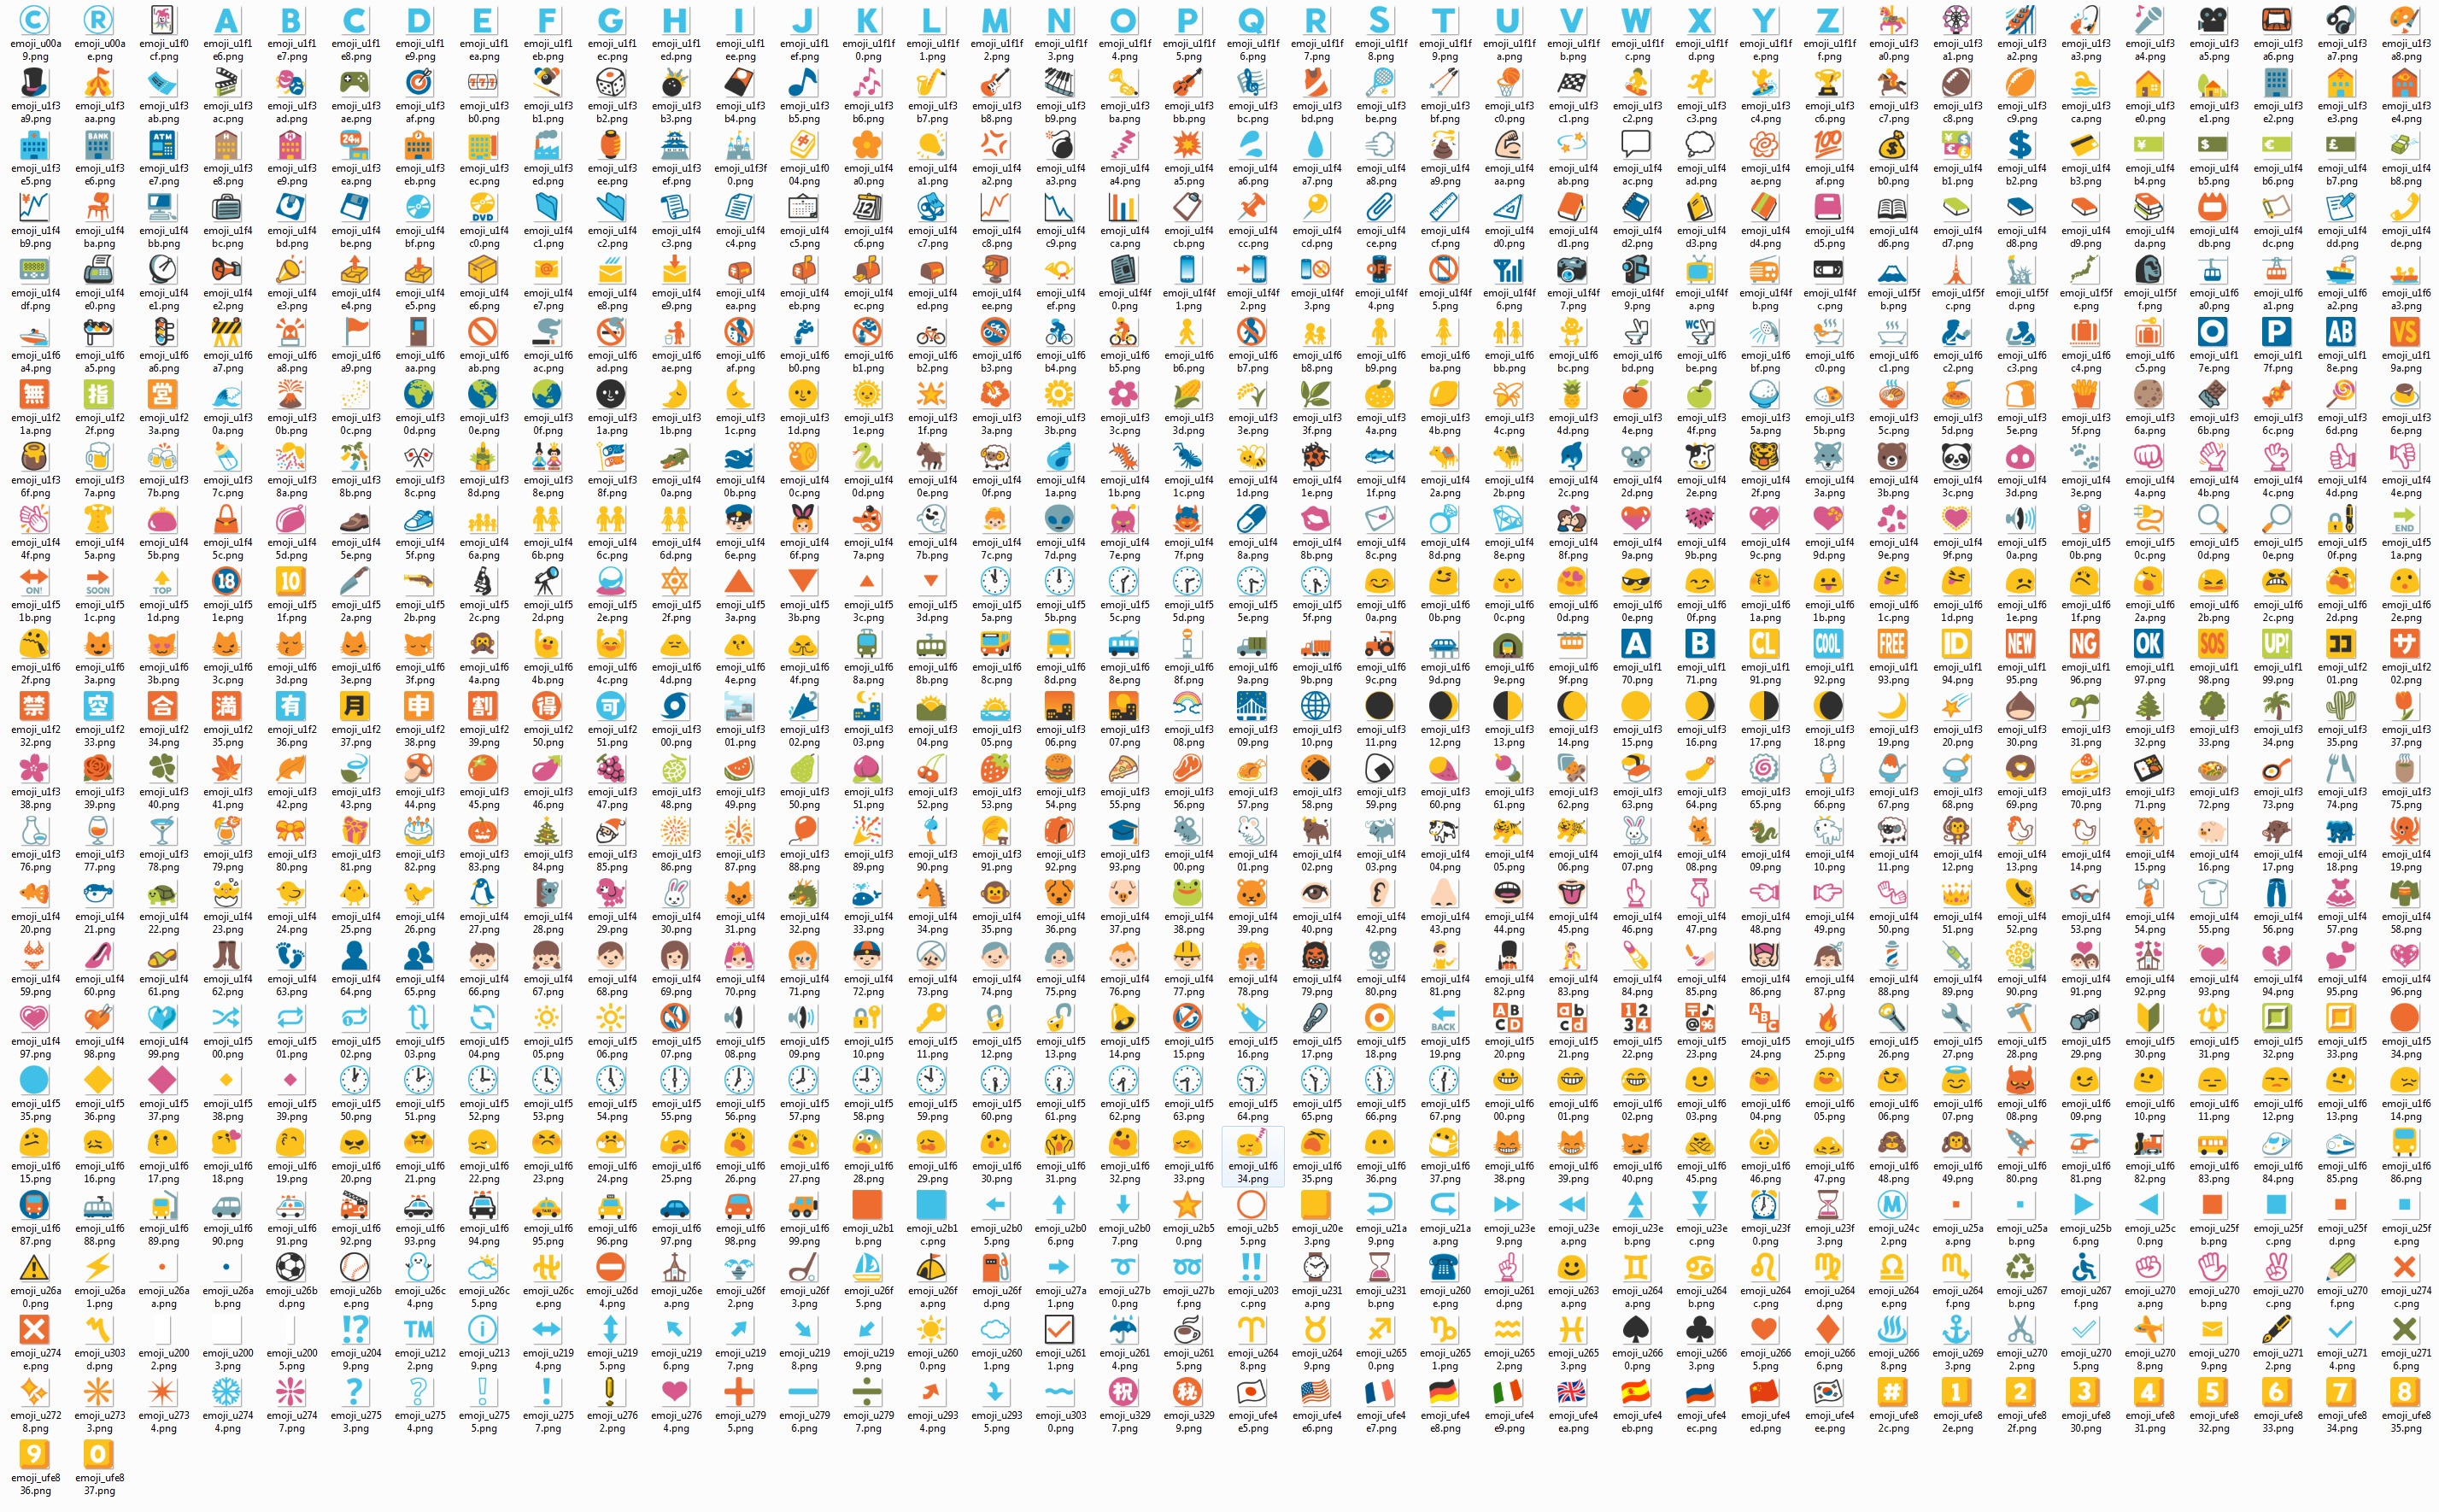 Smiley Faces Emoticons List Meaning